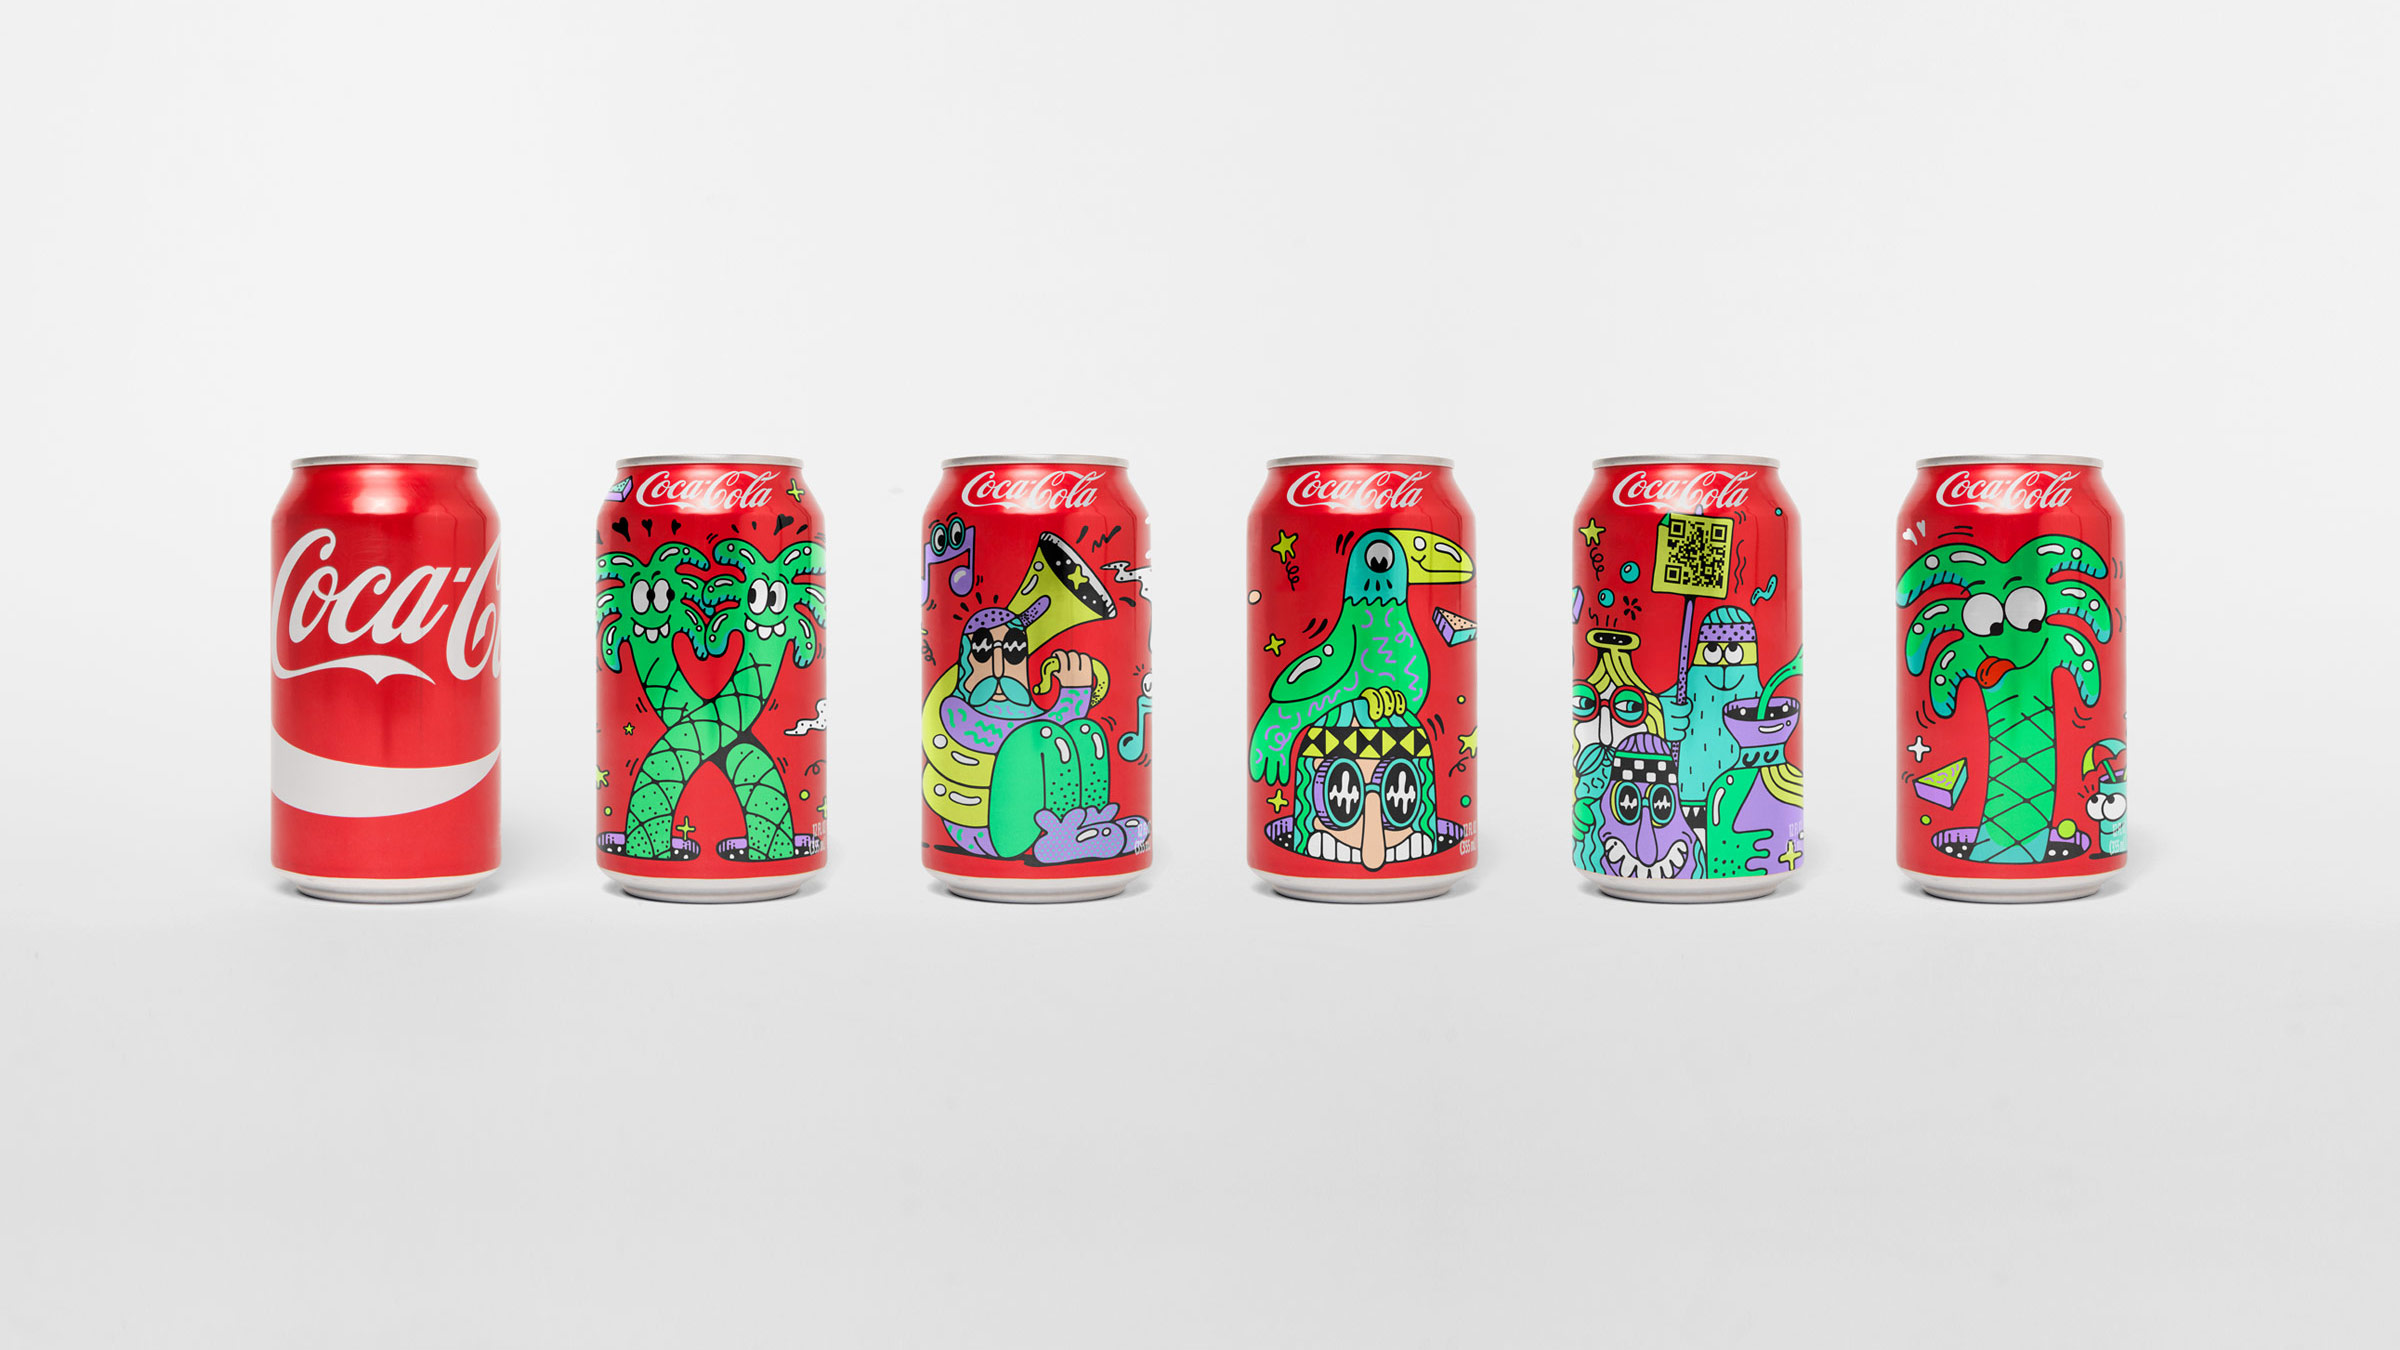 Limited edition art cans designed for Coca-Cola Spain